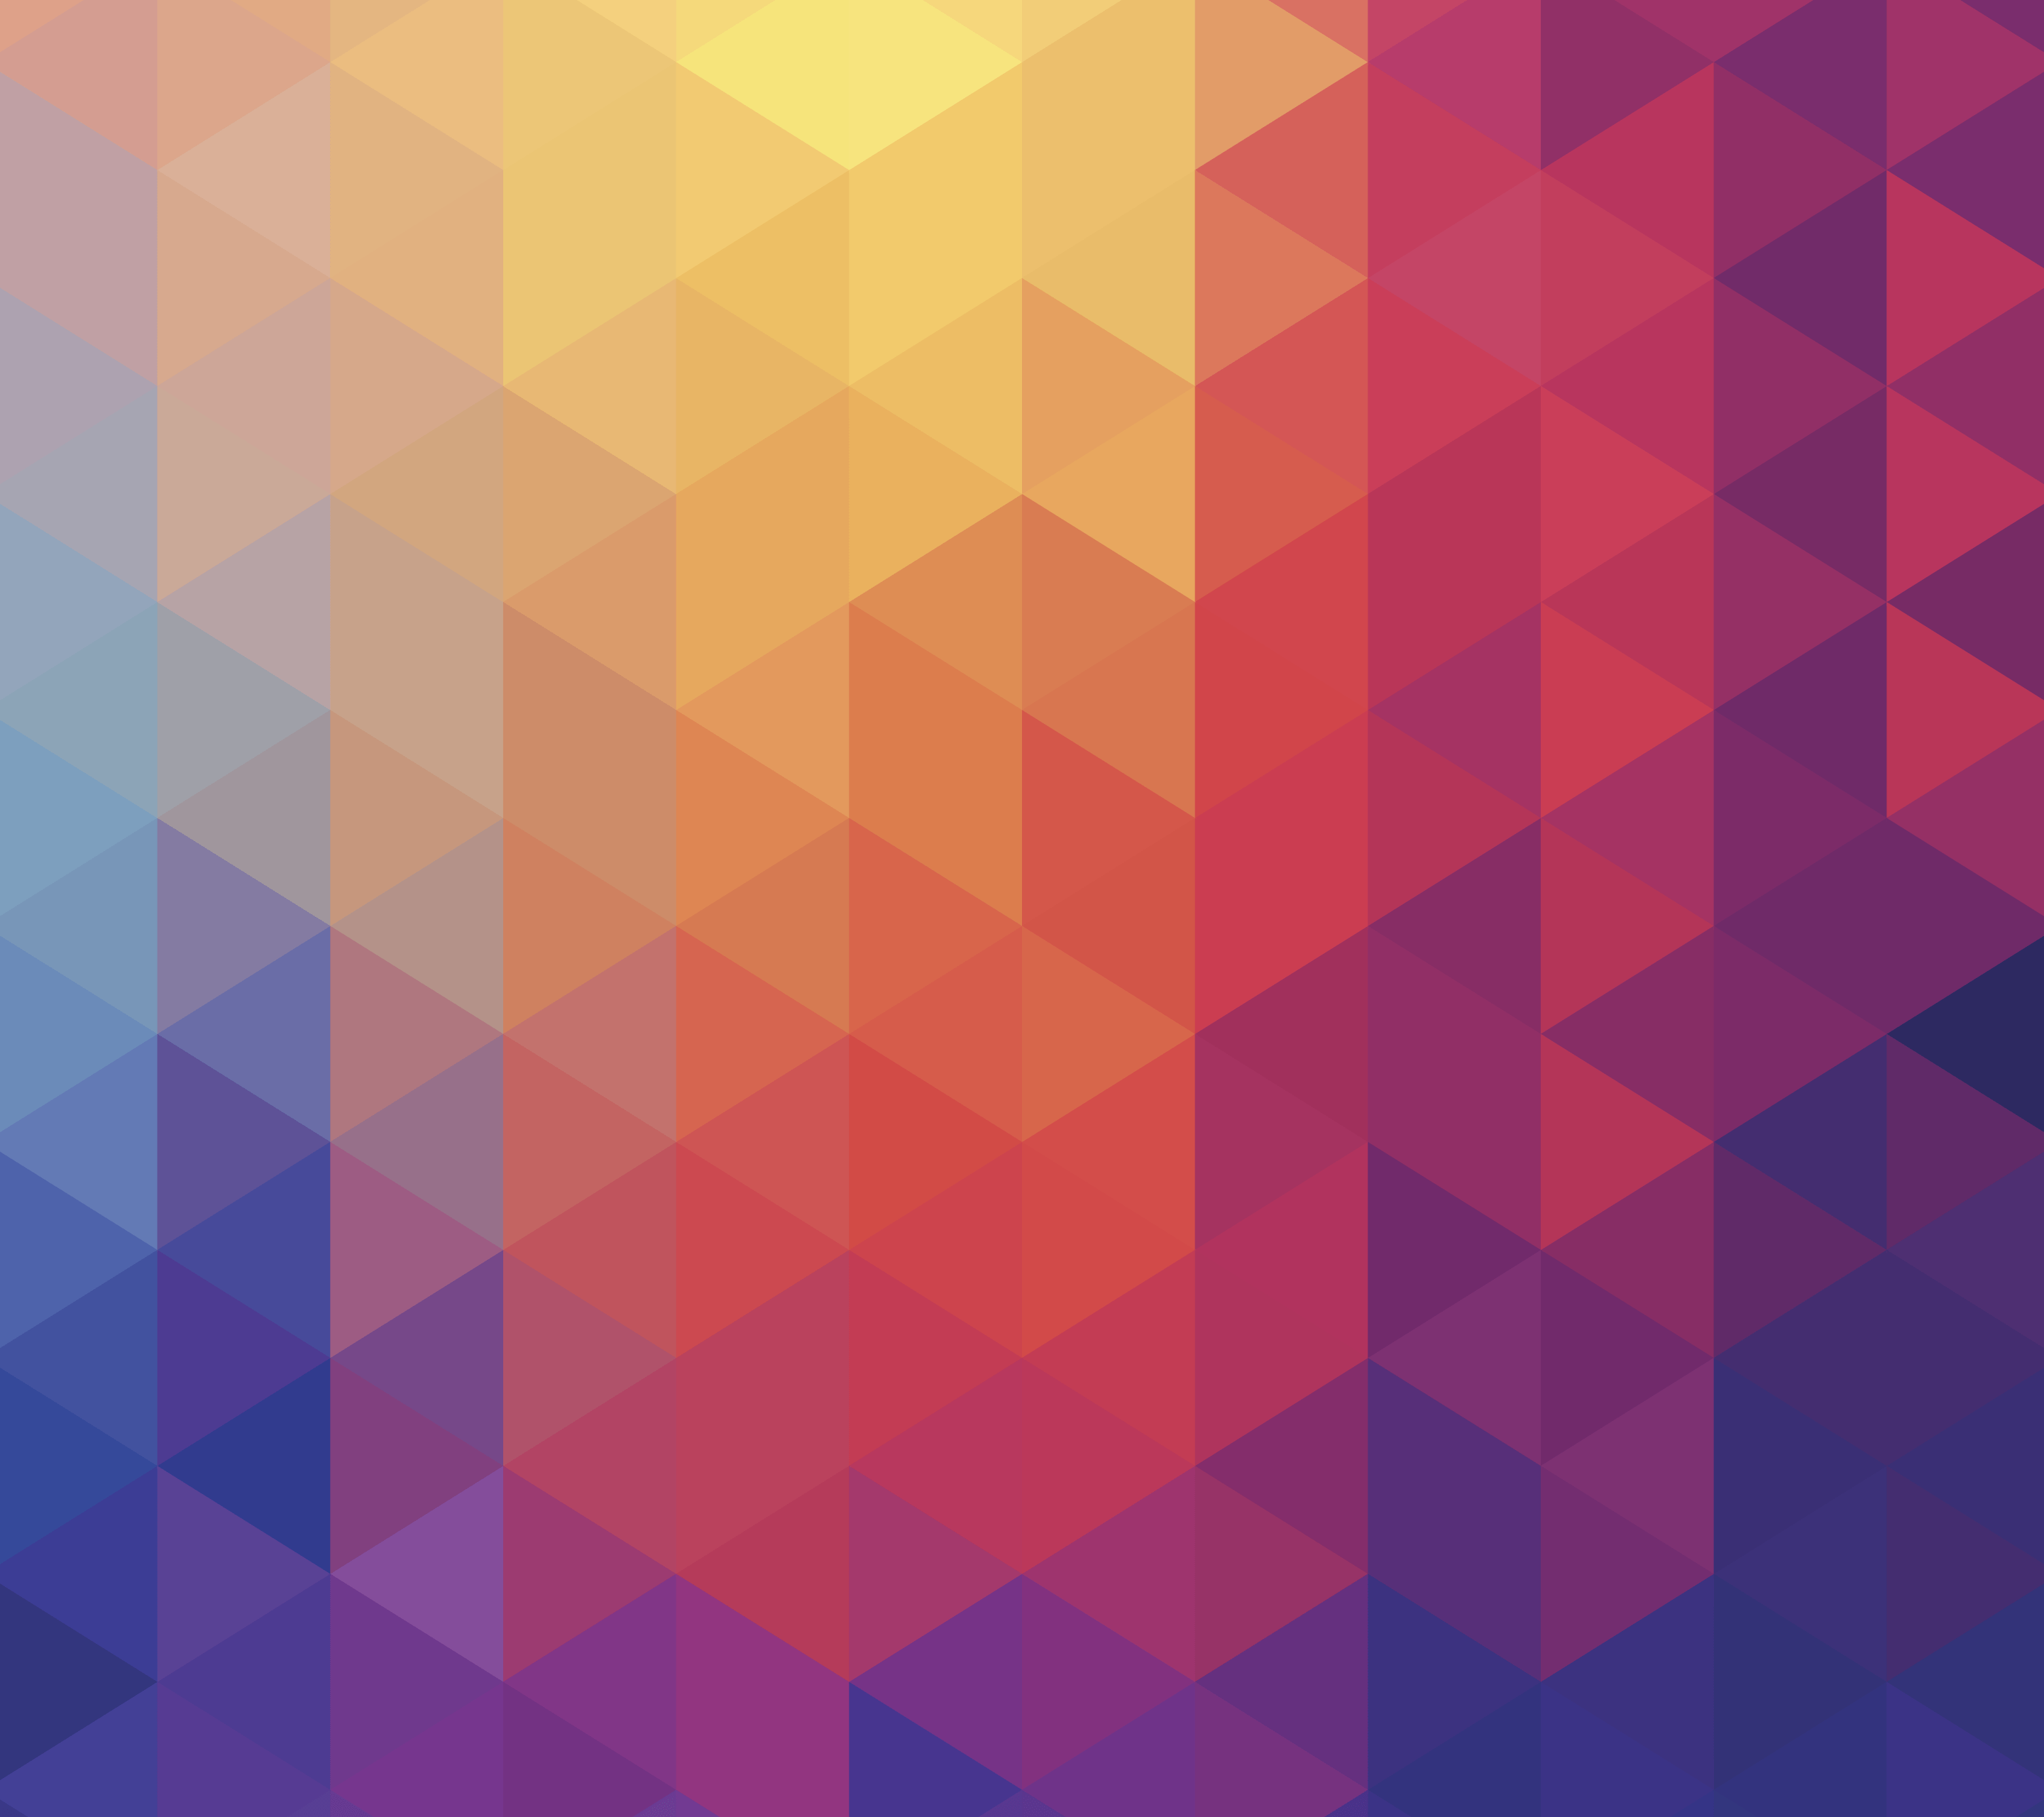 LG G3 wallpaper now available, download them here